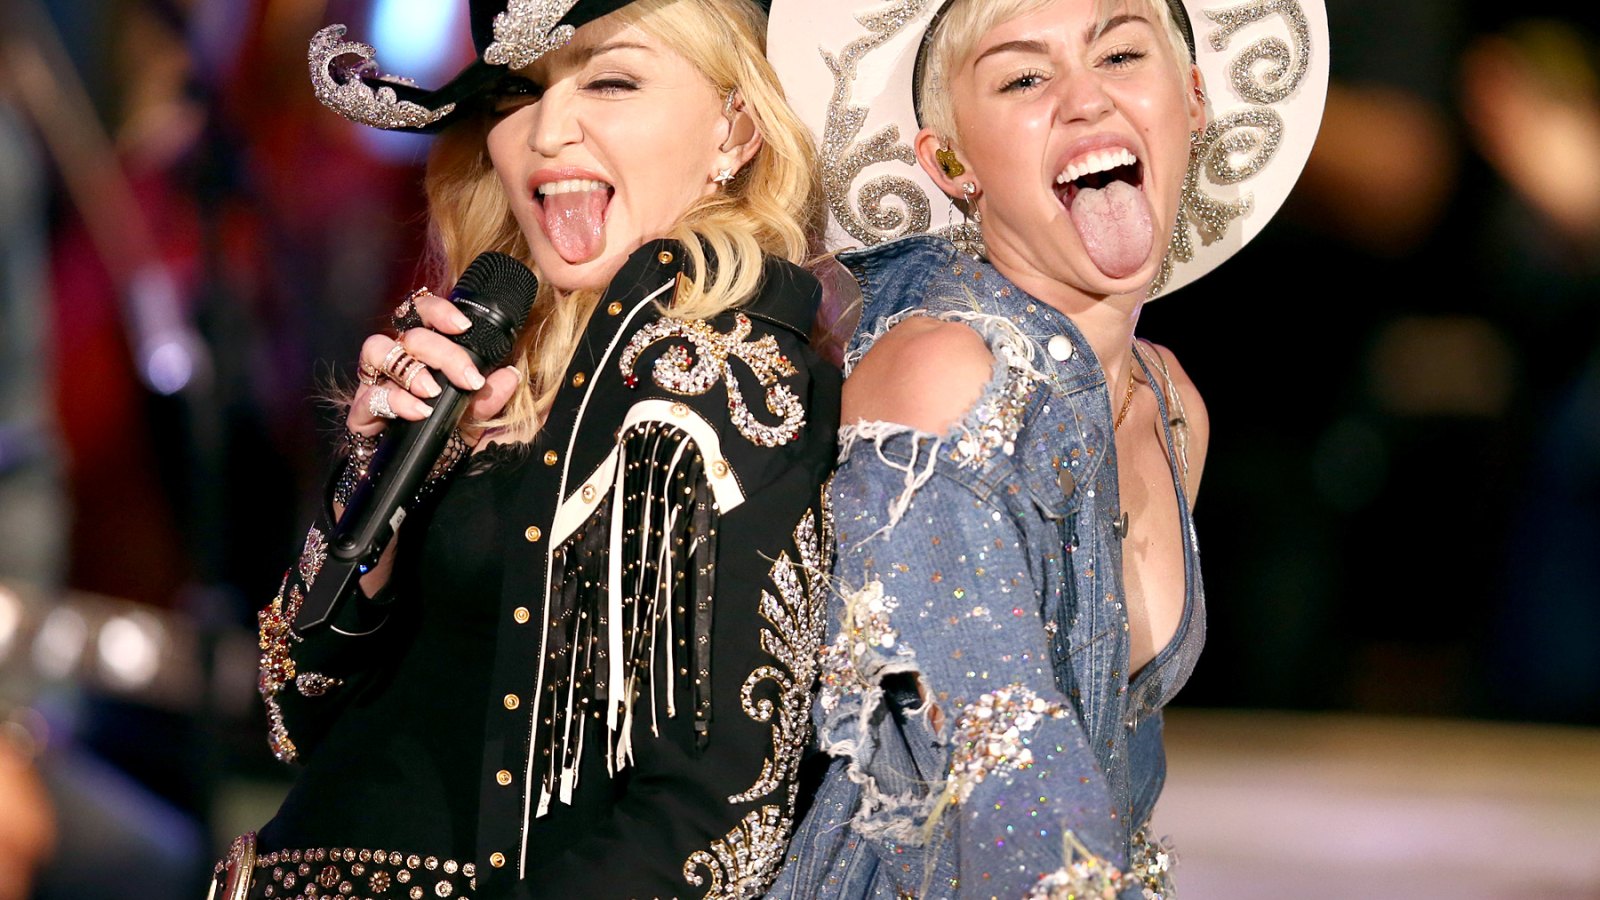 Madonna and Miley Cyrus performing together